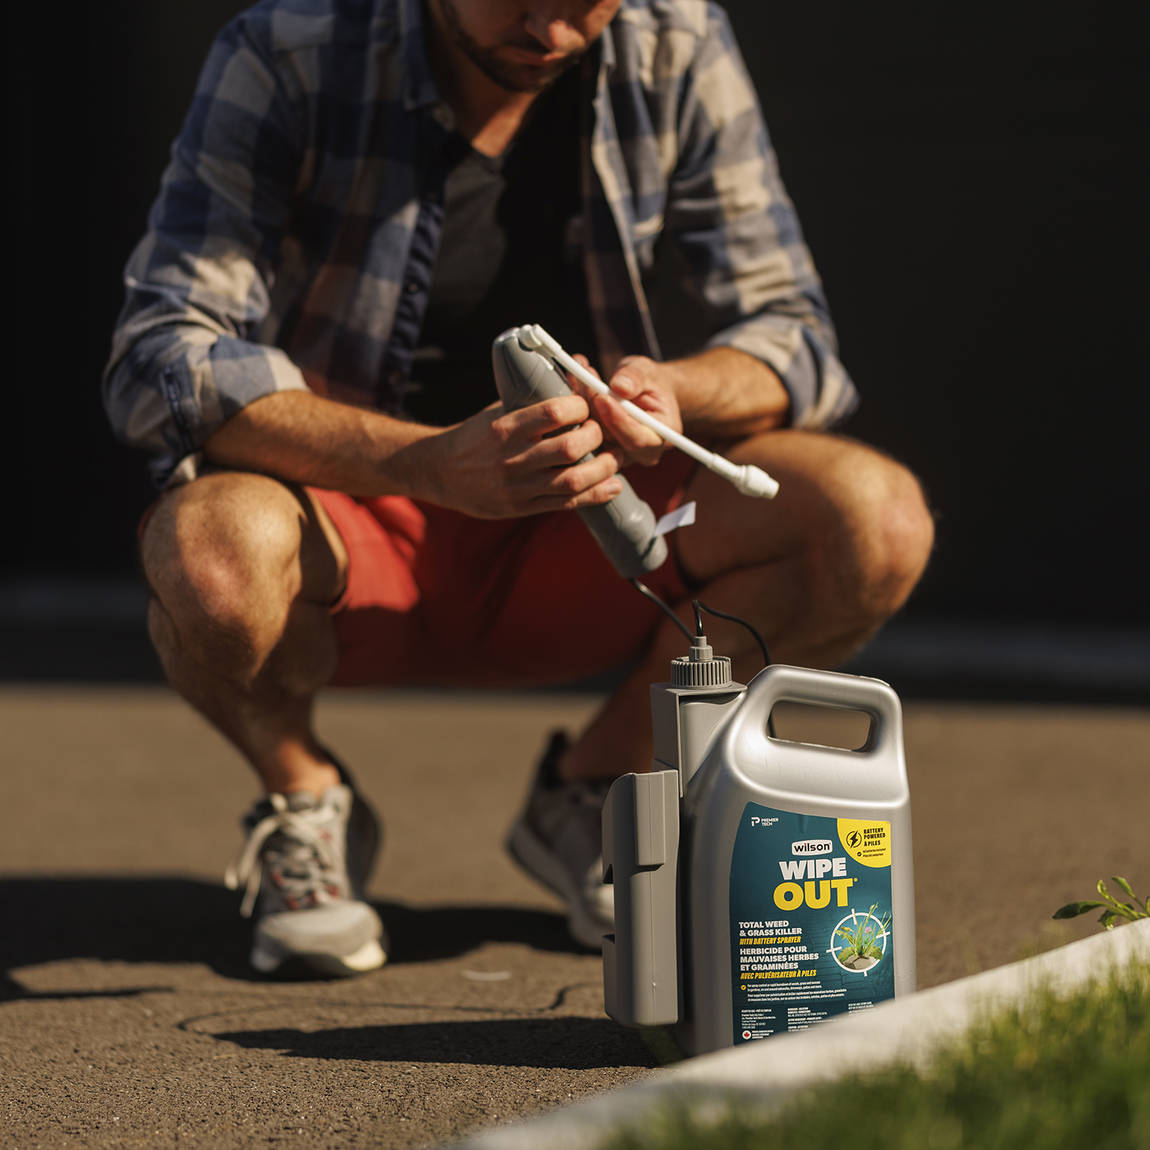 wilson-wipe-out-total-weed-and-grass-killer-4l-3